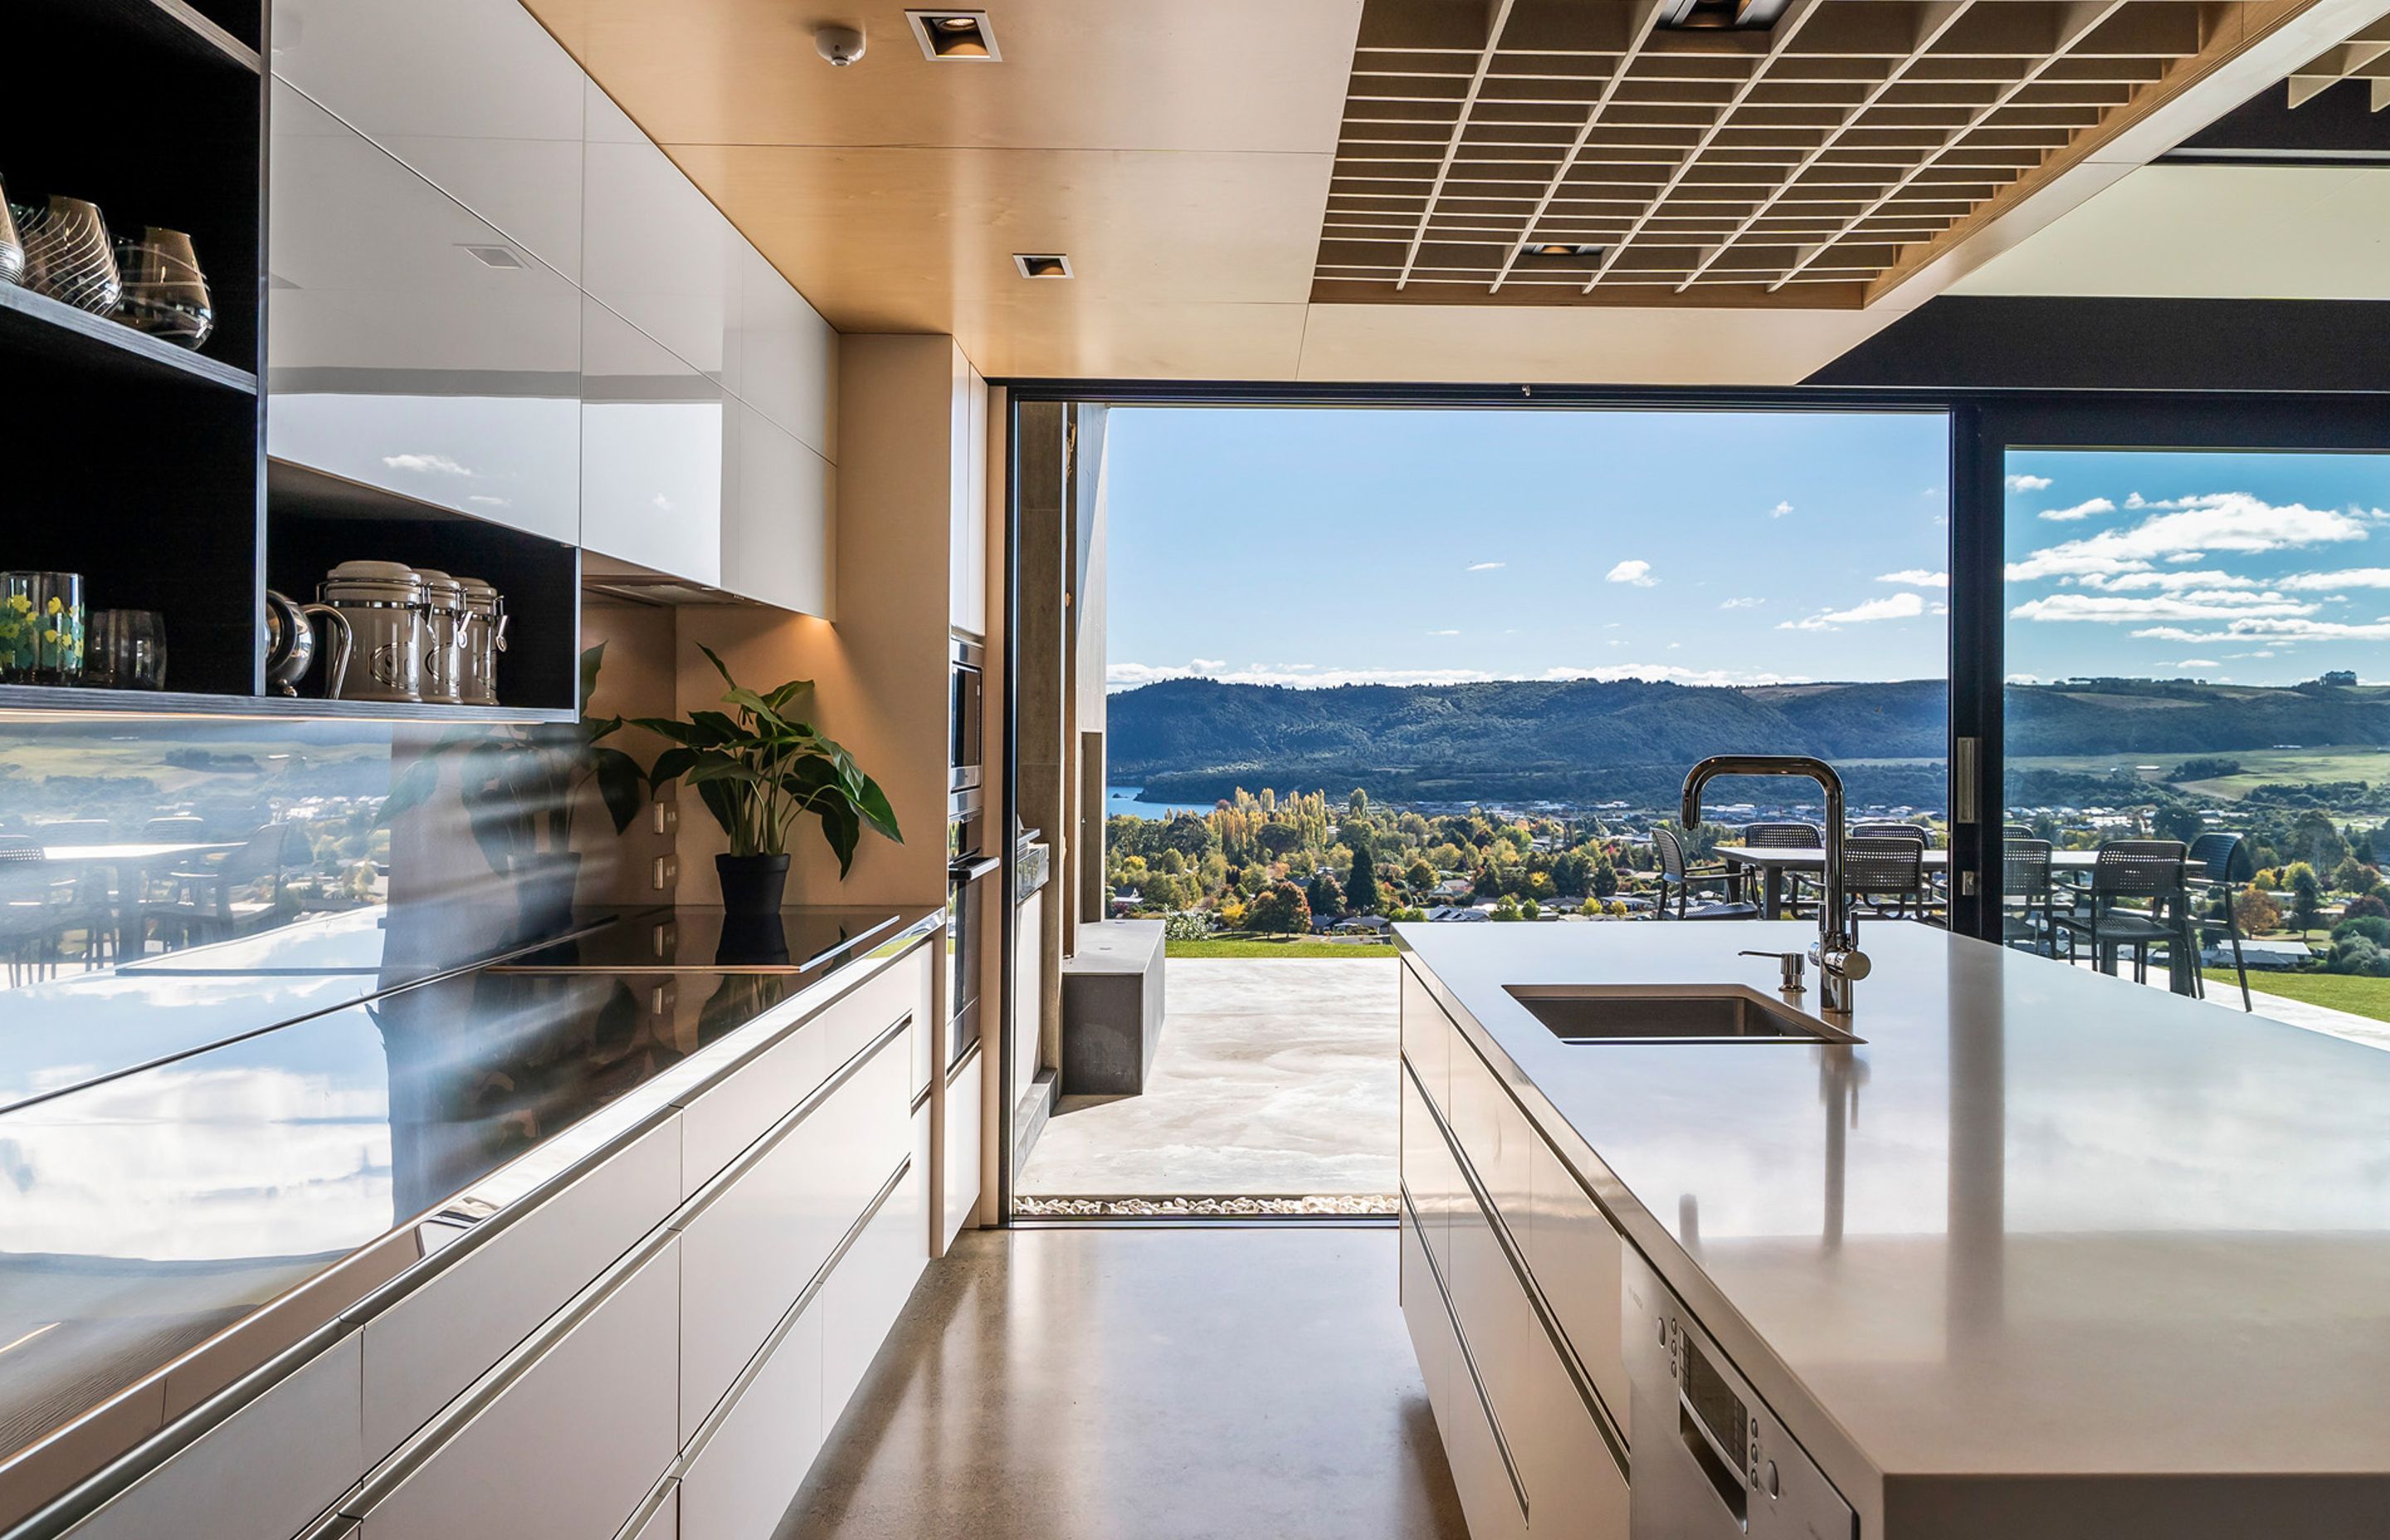 The highly functional kitchen features 'this view' from the kitchen sink – say no more! Photograph: ArchiPro.